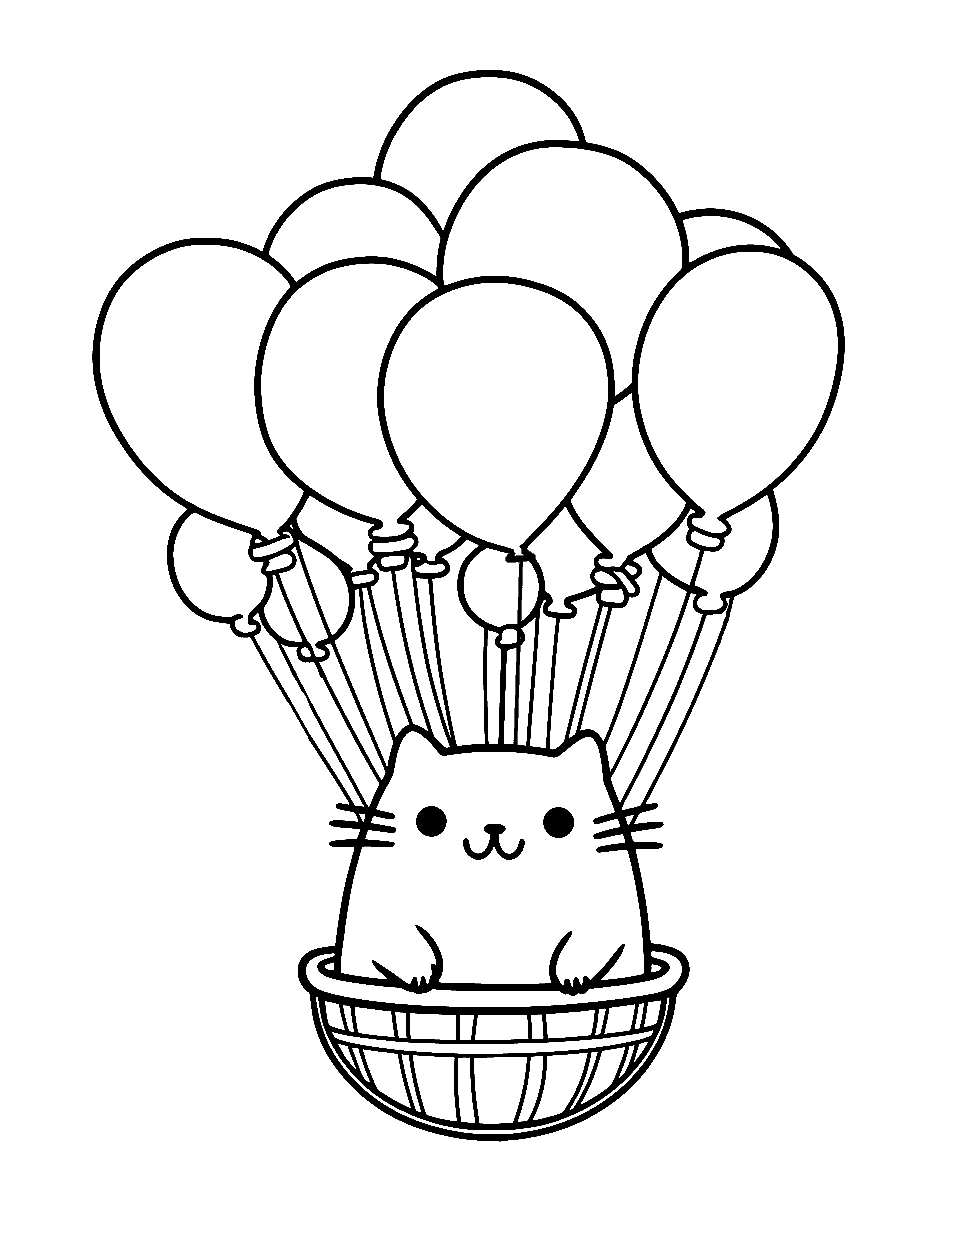 Pusheen's Balloon Ride Coloring Page - Pusheen floating with a bunch of colorful balloons.